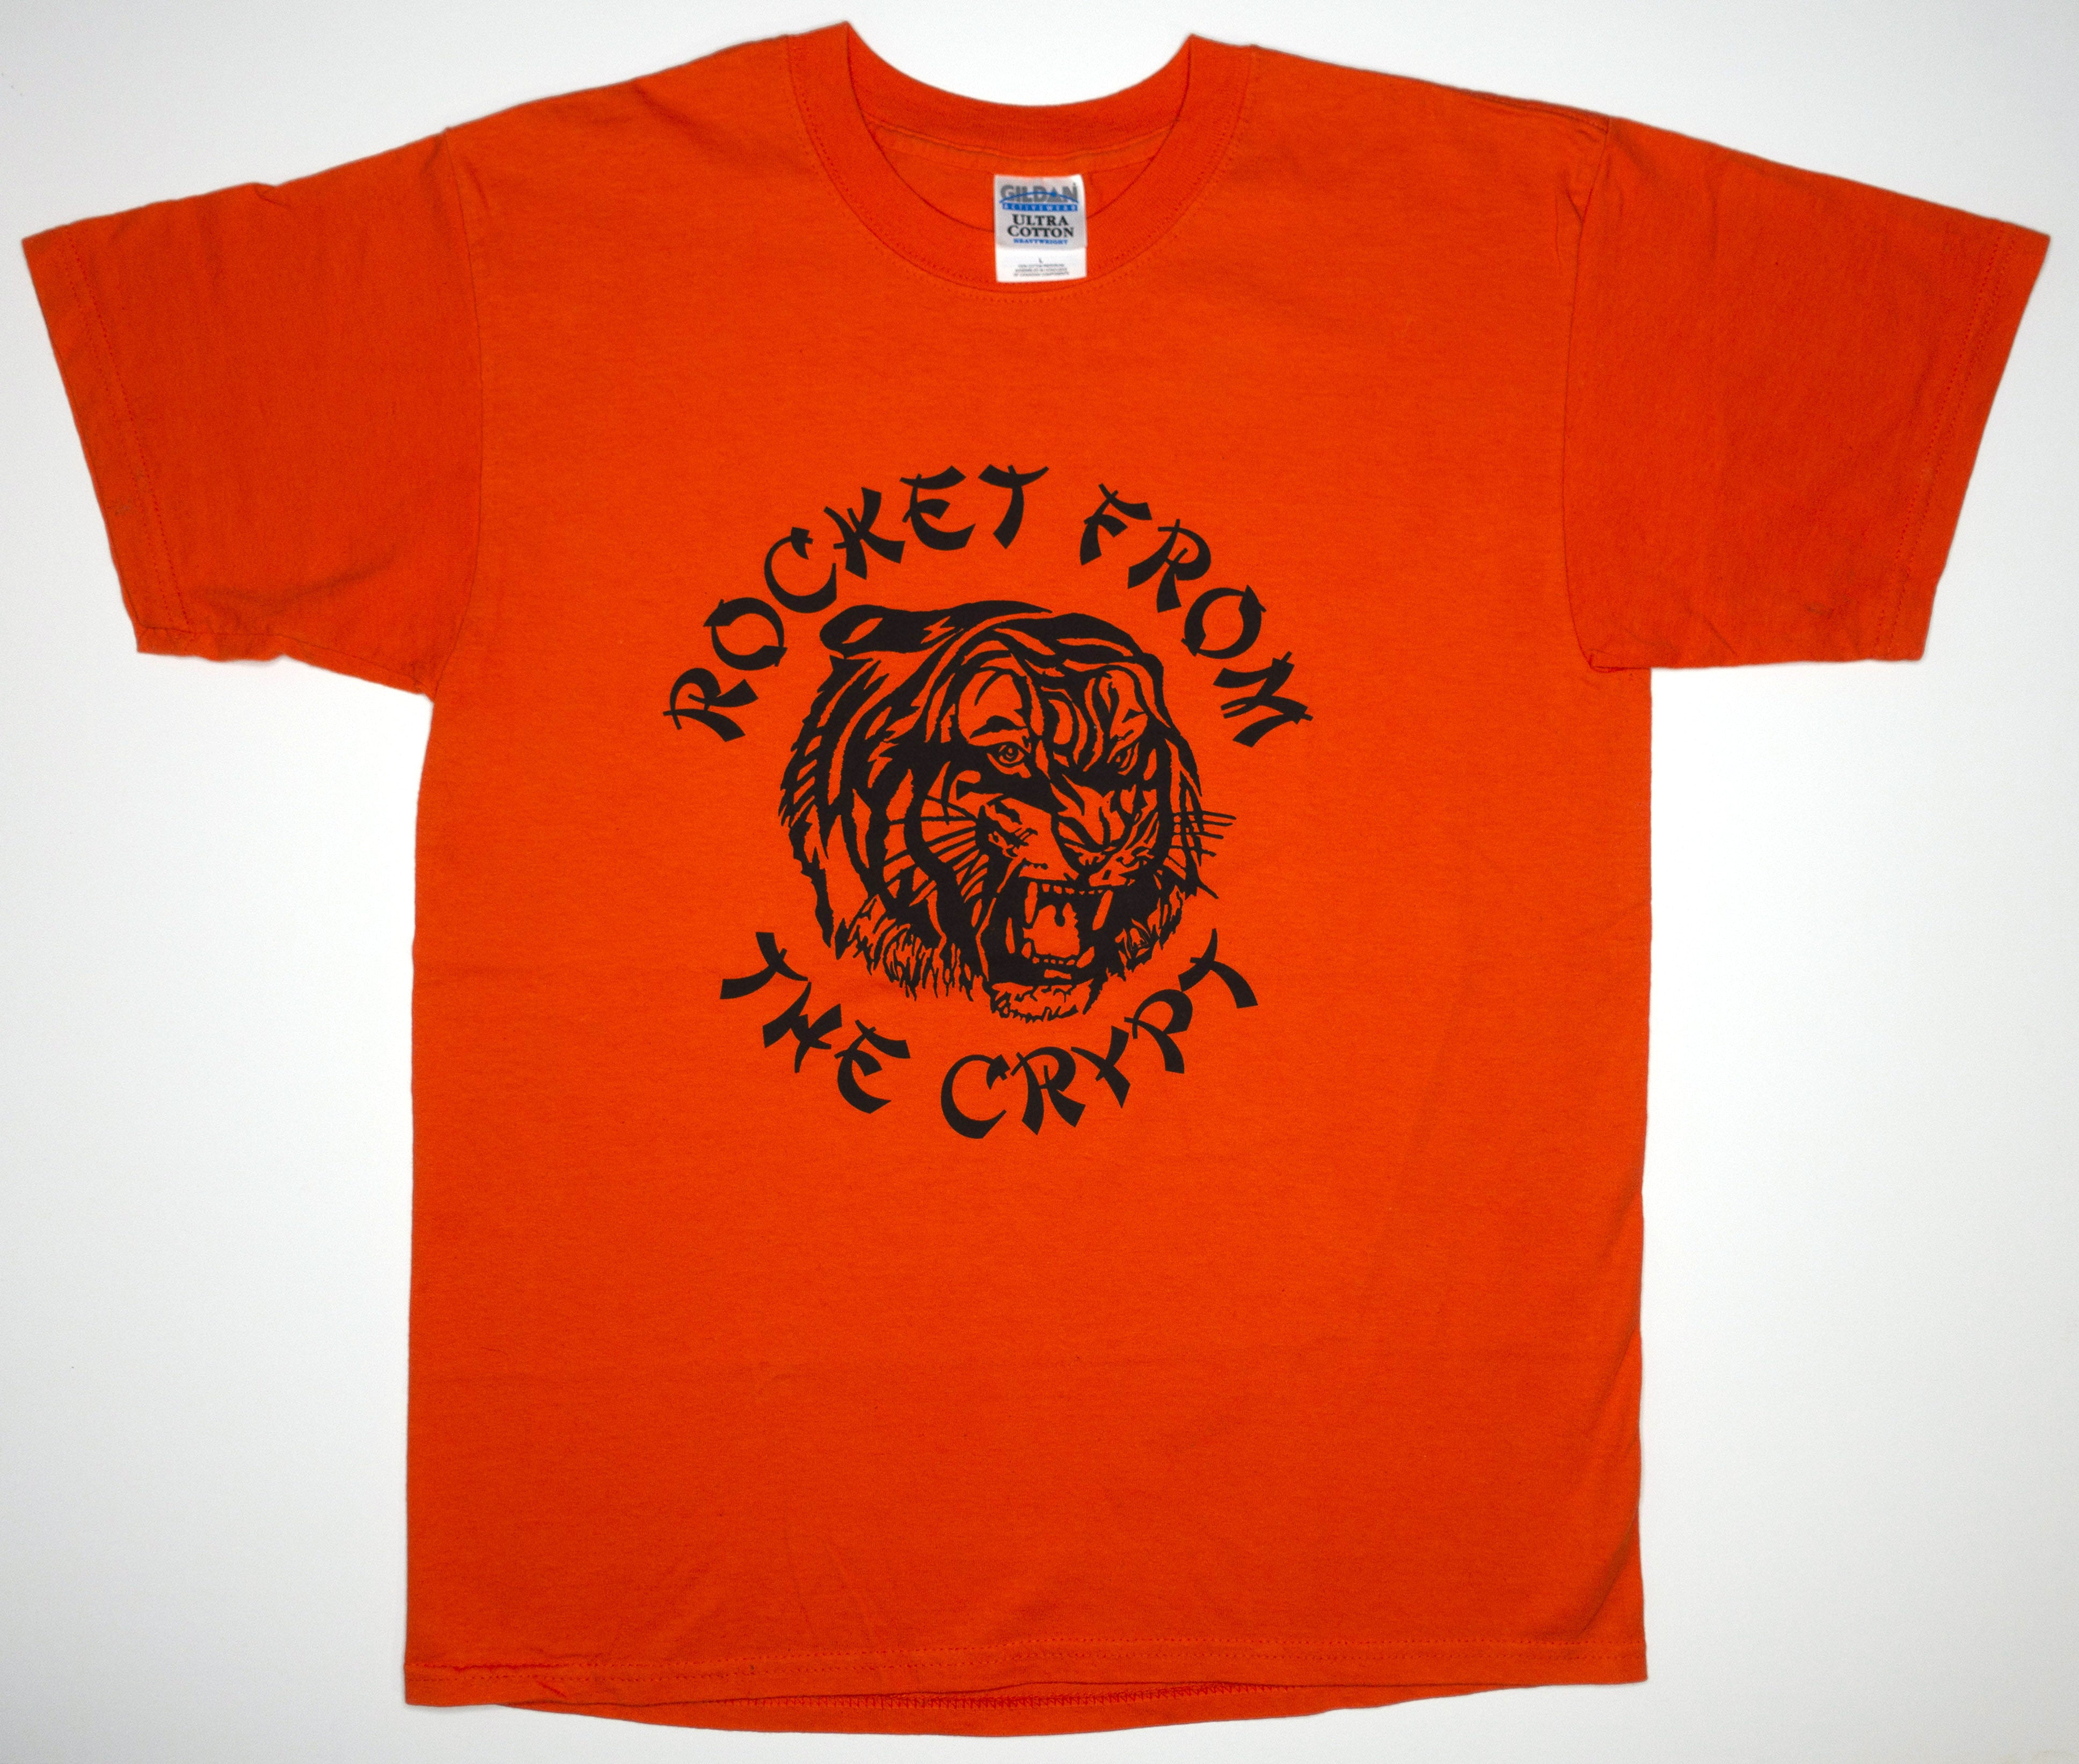 Rocket From The Crypt - 1/C Tiger Tour Shirt Size Large